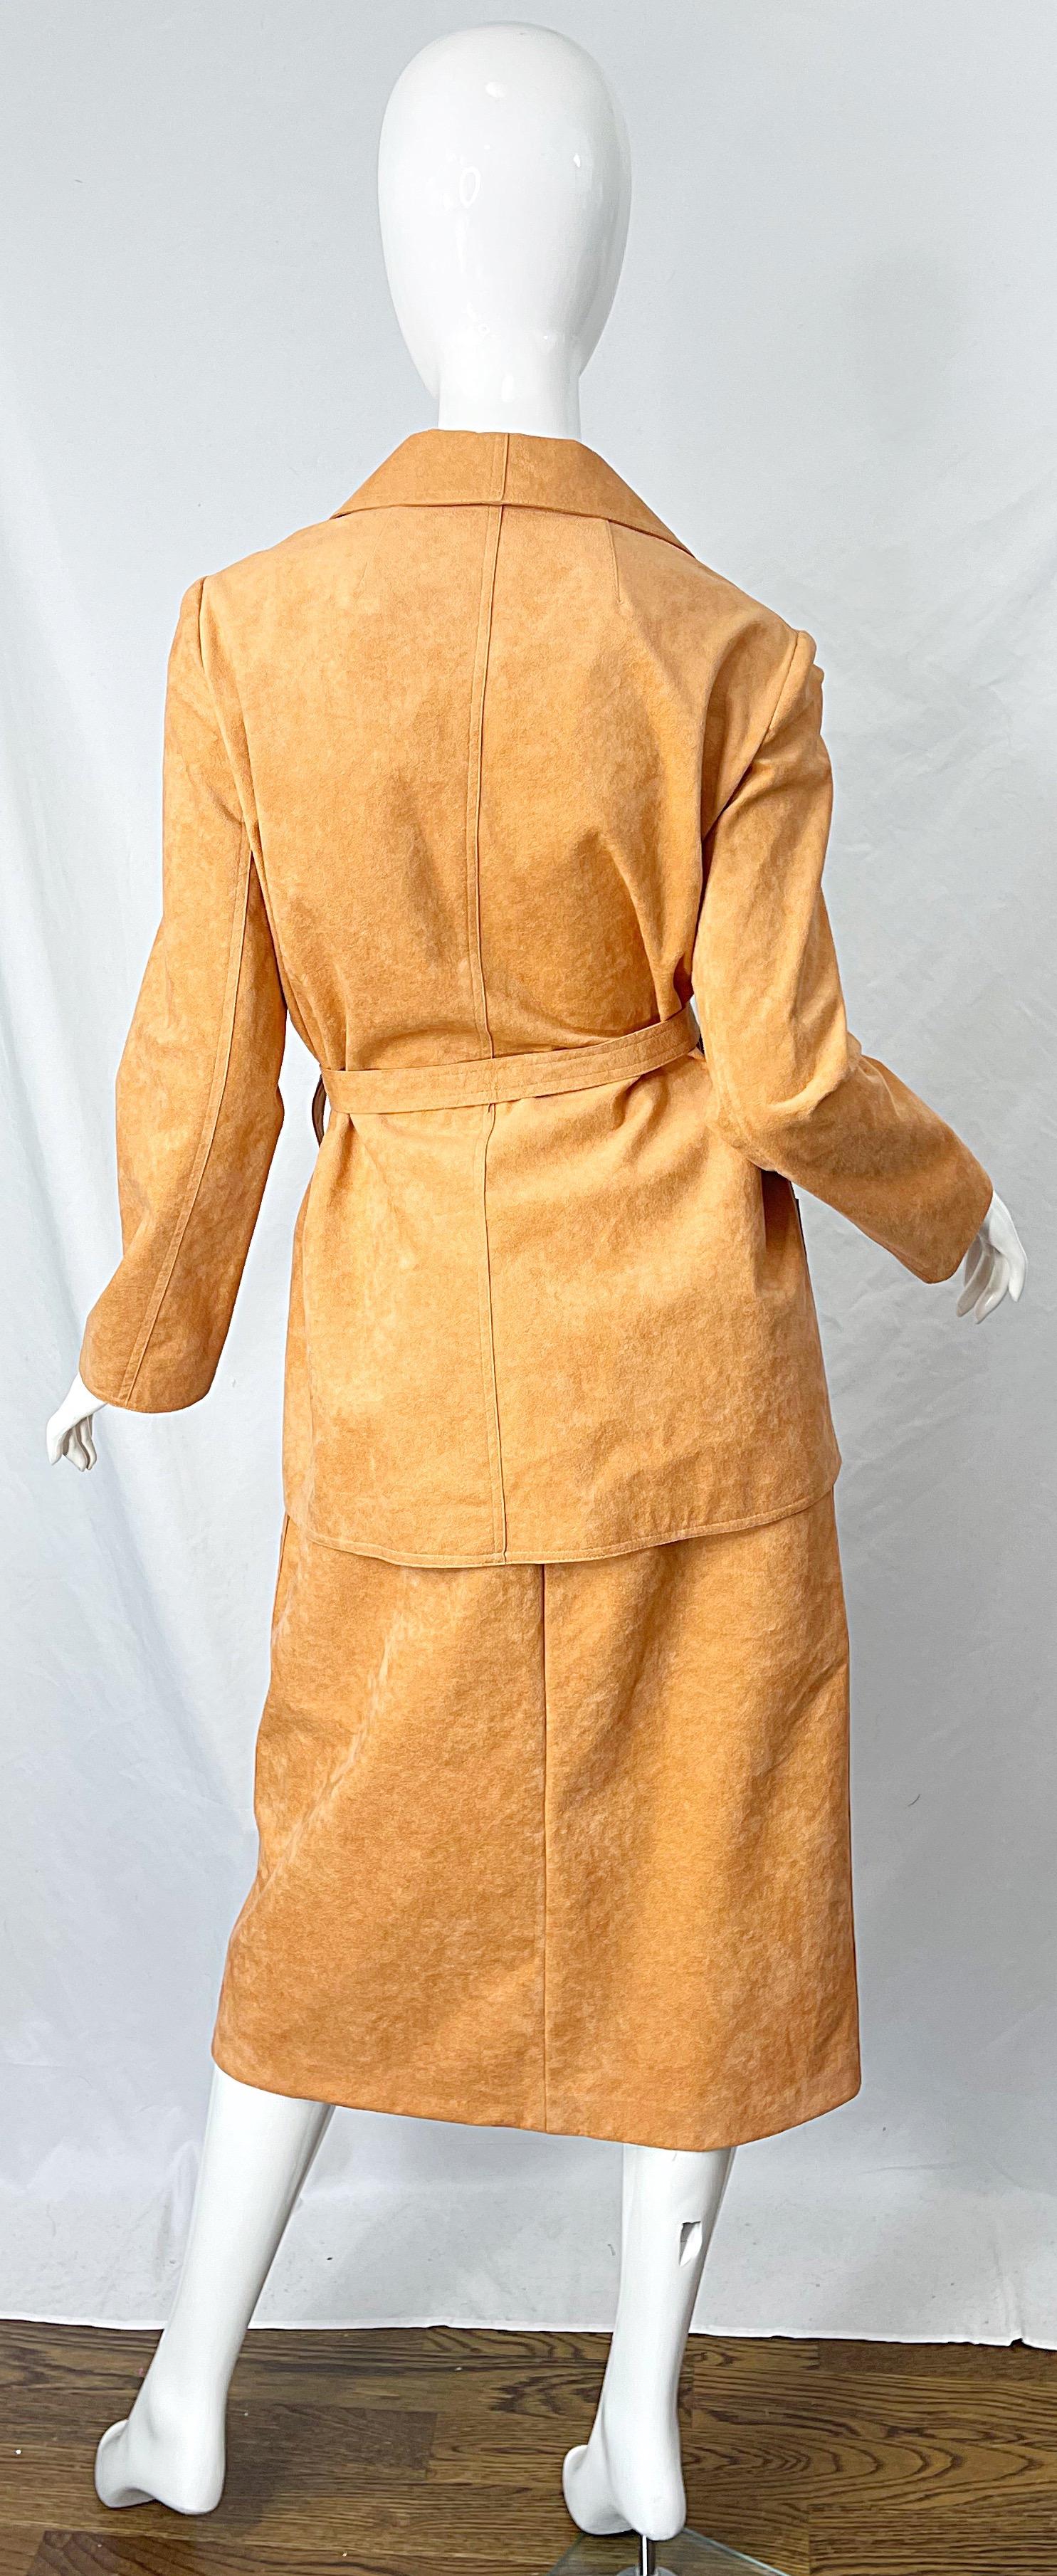 Halston 1970s Salmon Peach Ultrasuede Vintage 70s Belted Jacket and Skirt Suit In Excellent Condition For Sale In San Diego, CA